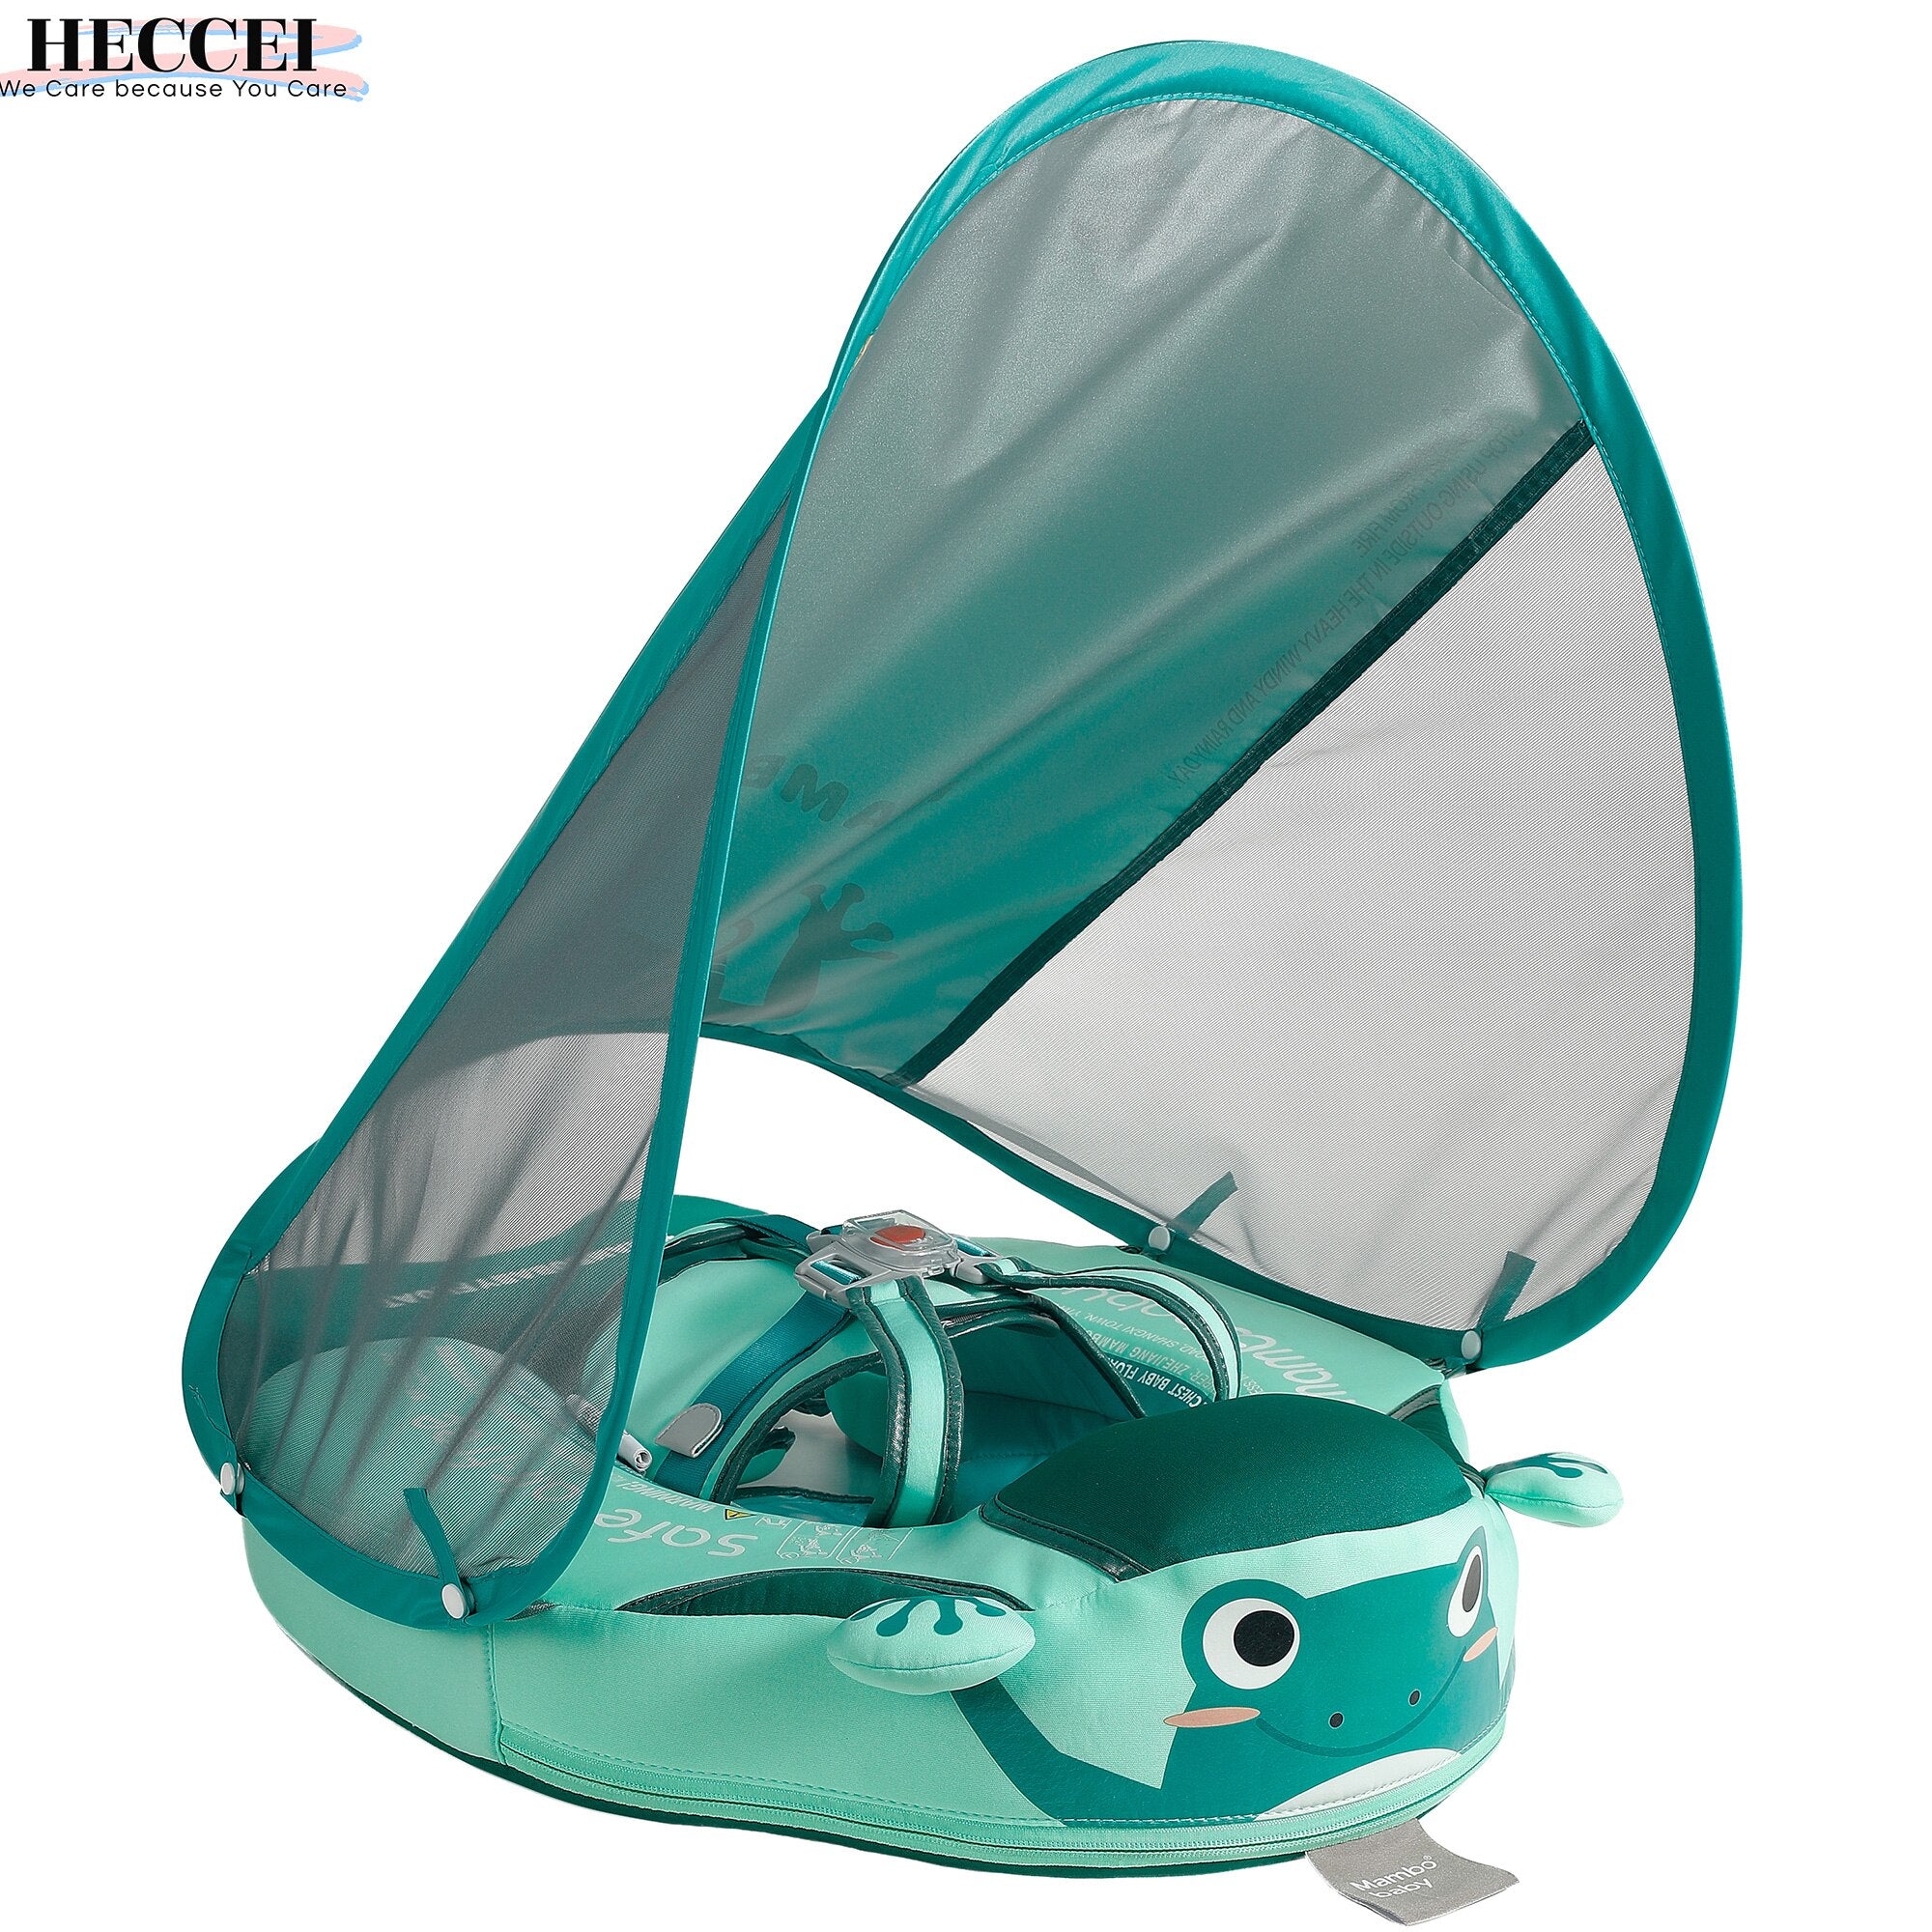 HECCEI Mambobaby Swim Float with Canopy Fruit Edition